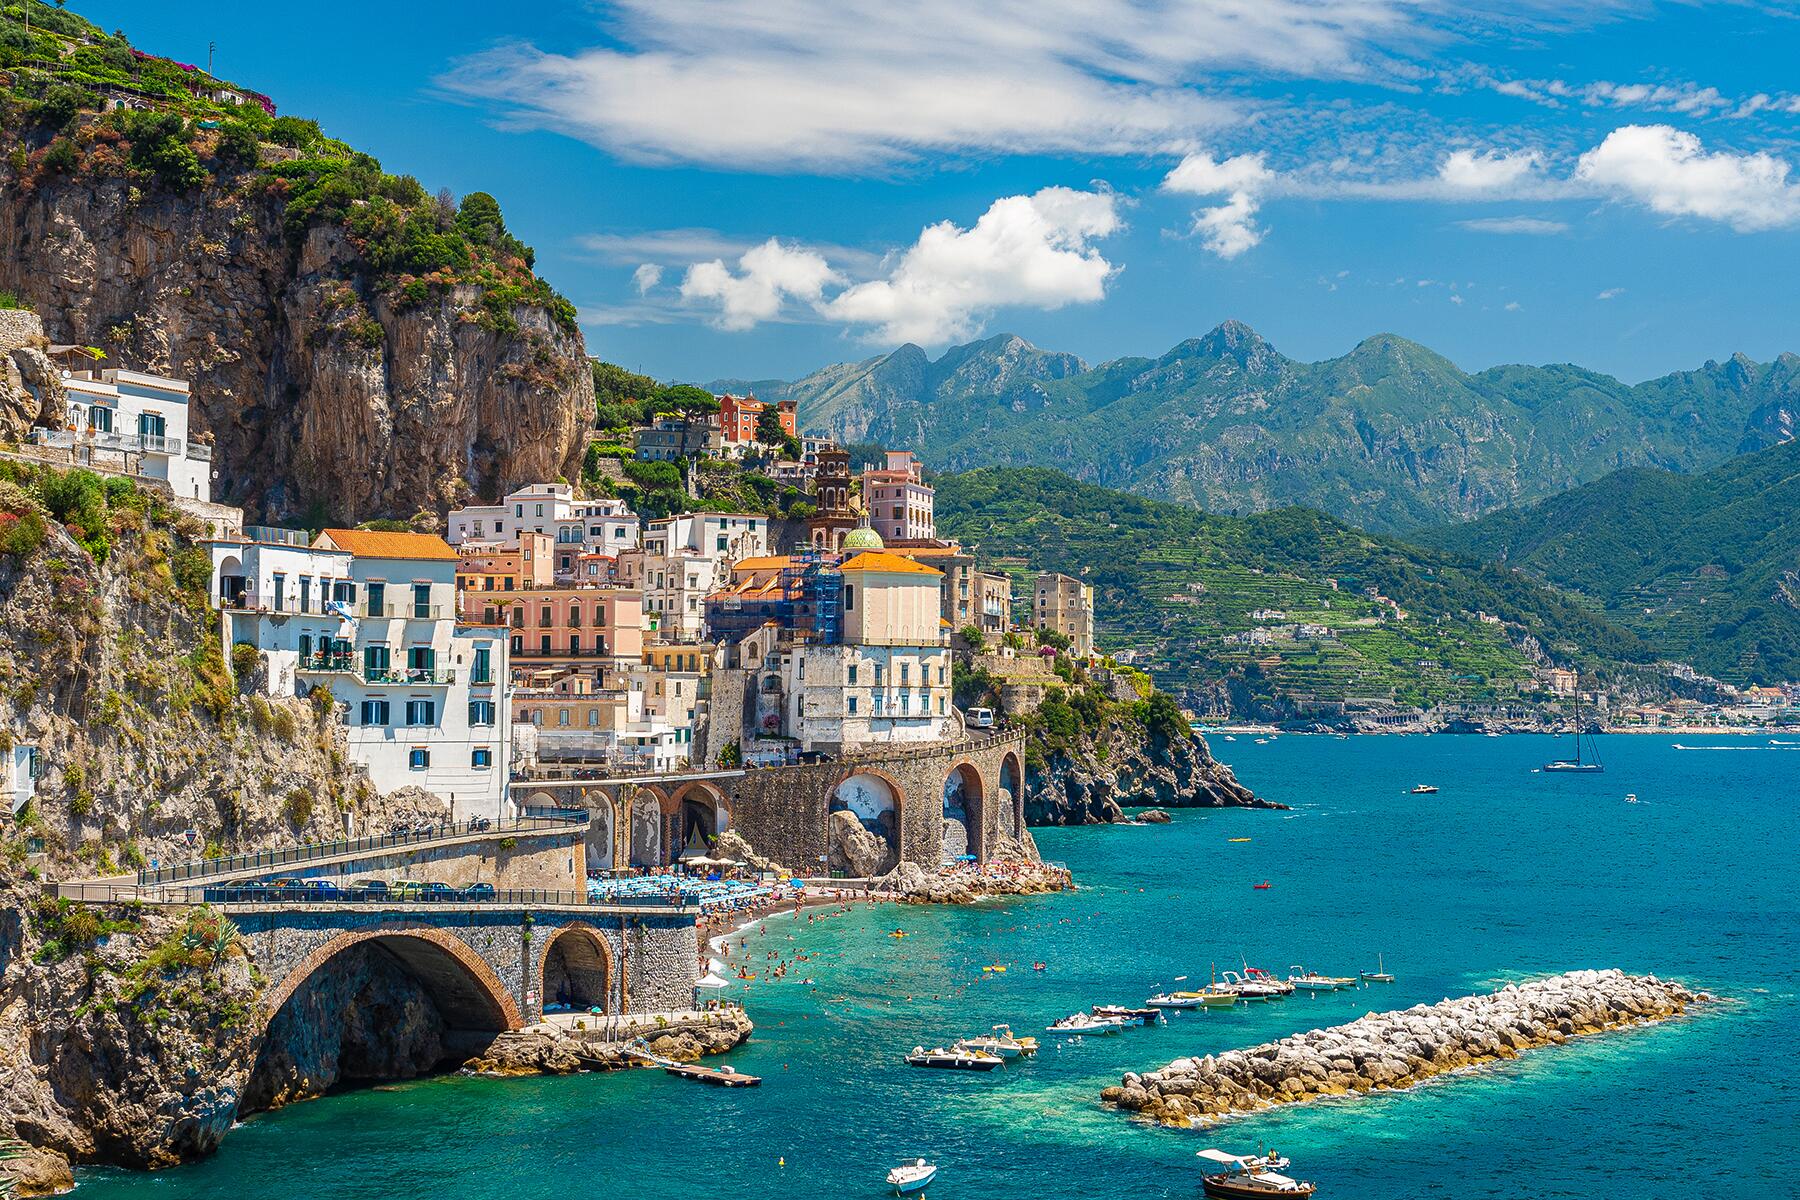 What to See and Do in the Amalfi Coast, Italy